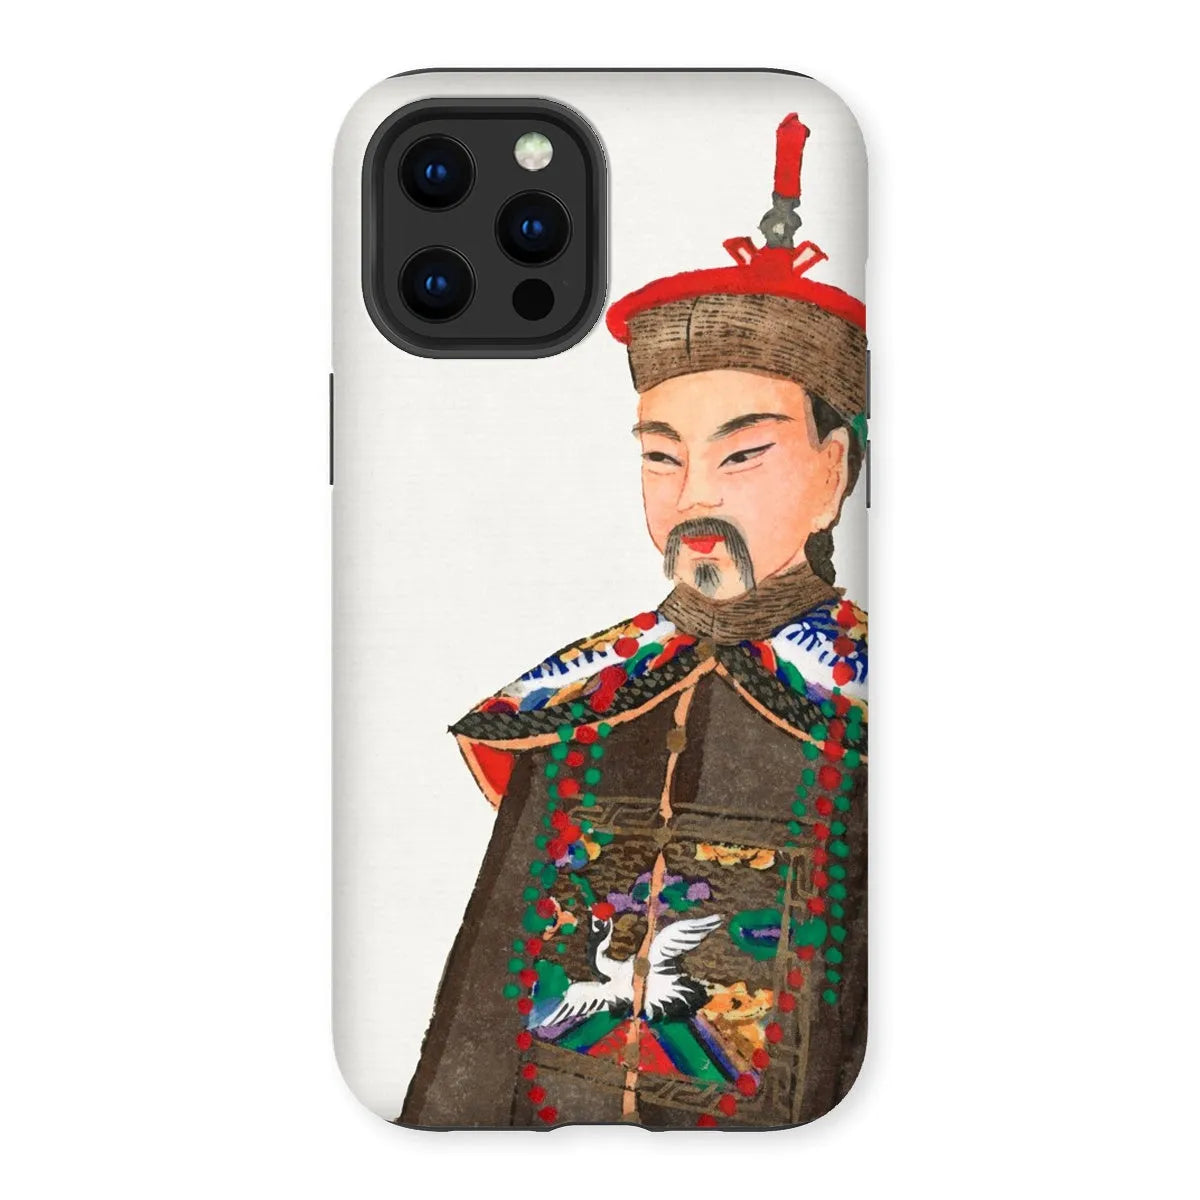 Nobleman At Court - Chinese Aesthetic Manchu Art Phone Case - Iphone 12 Pro Max / Matte - Mobile Phone Cases